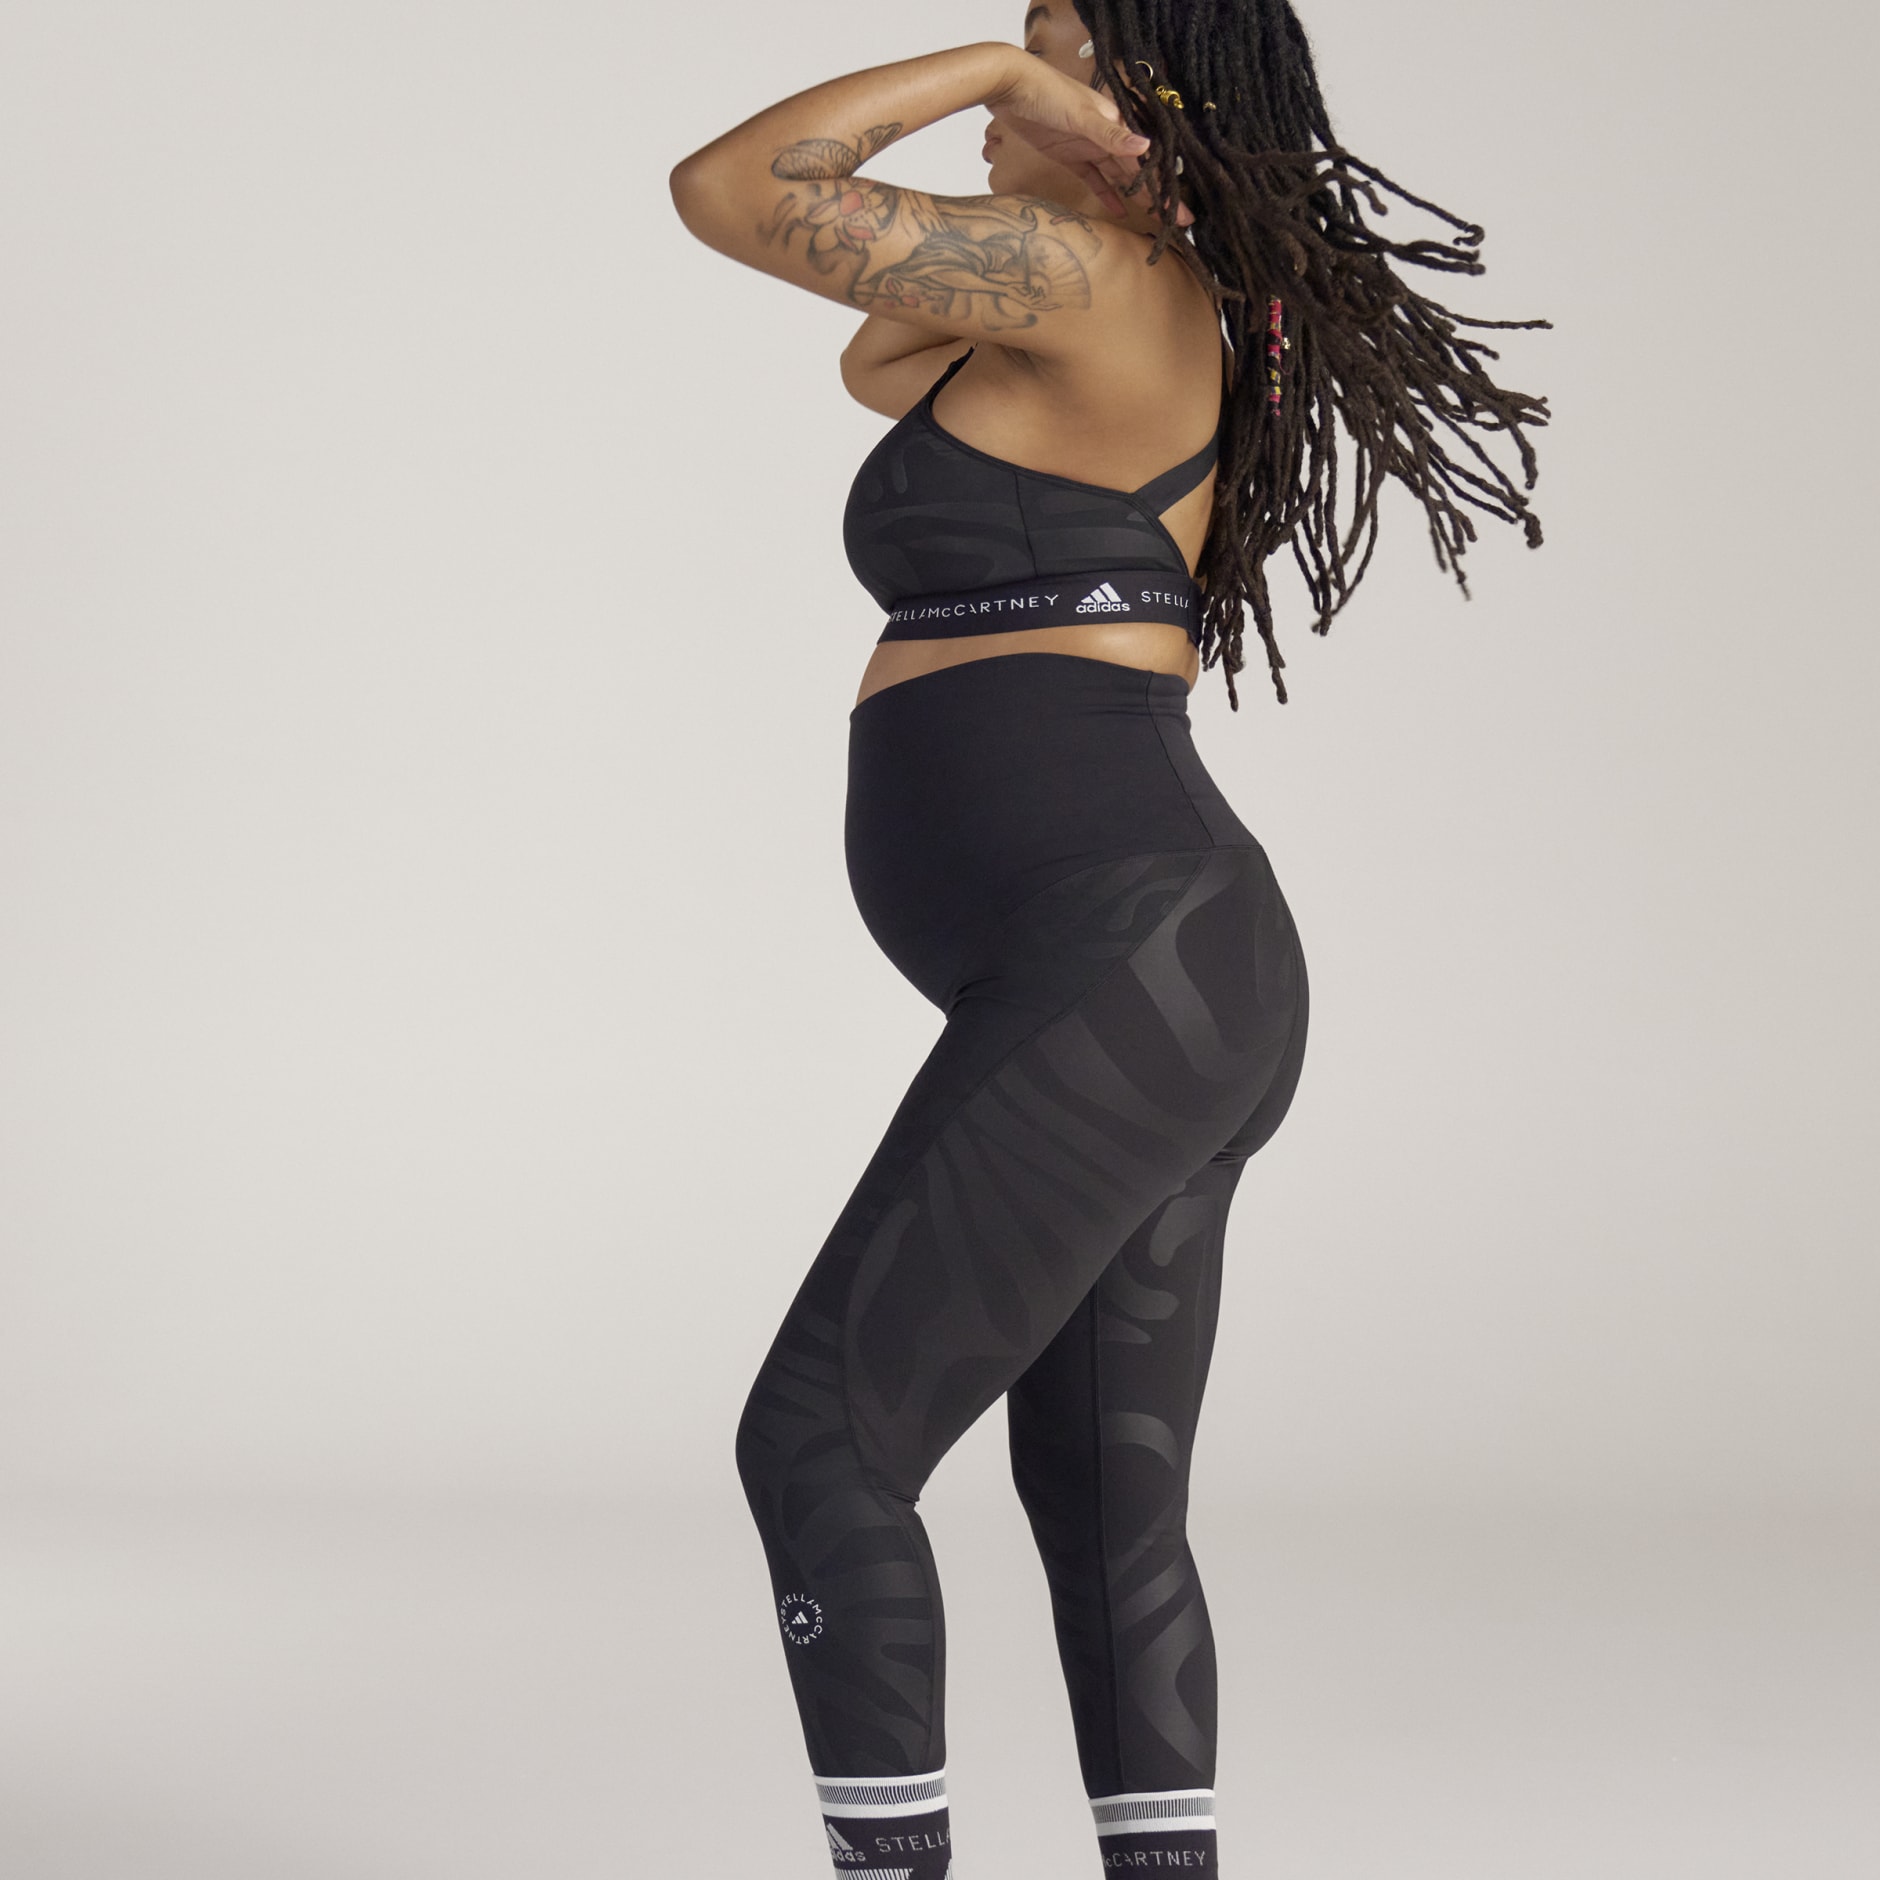 Maternity Yoga Clothes: What to Wear When Pregnant. Nike IN